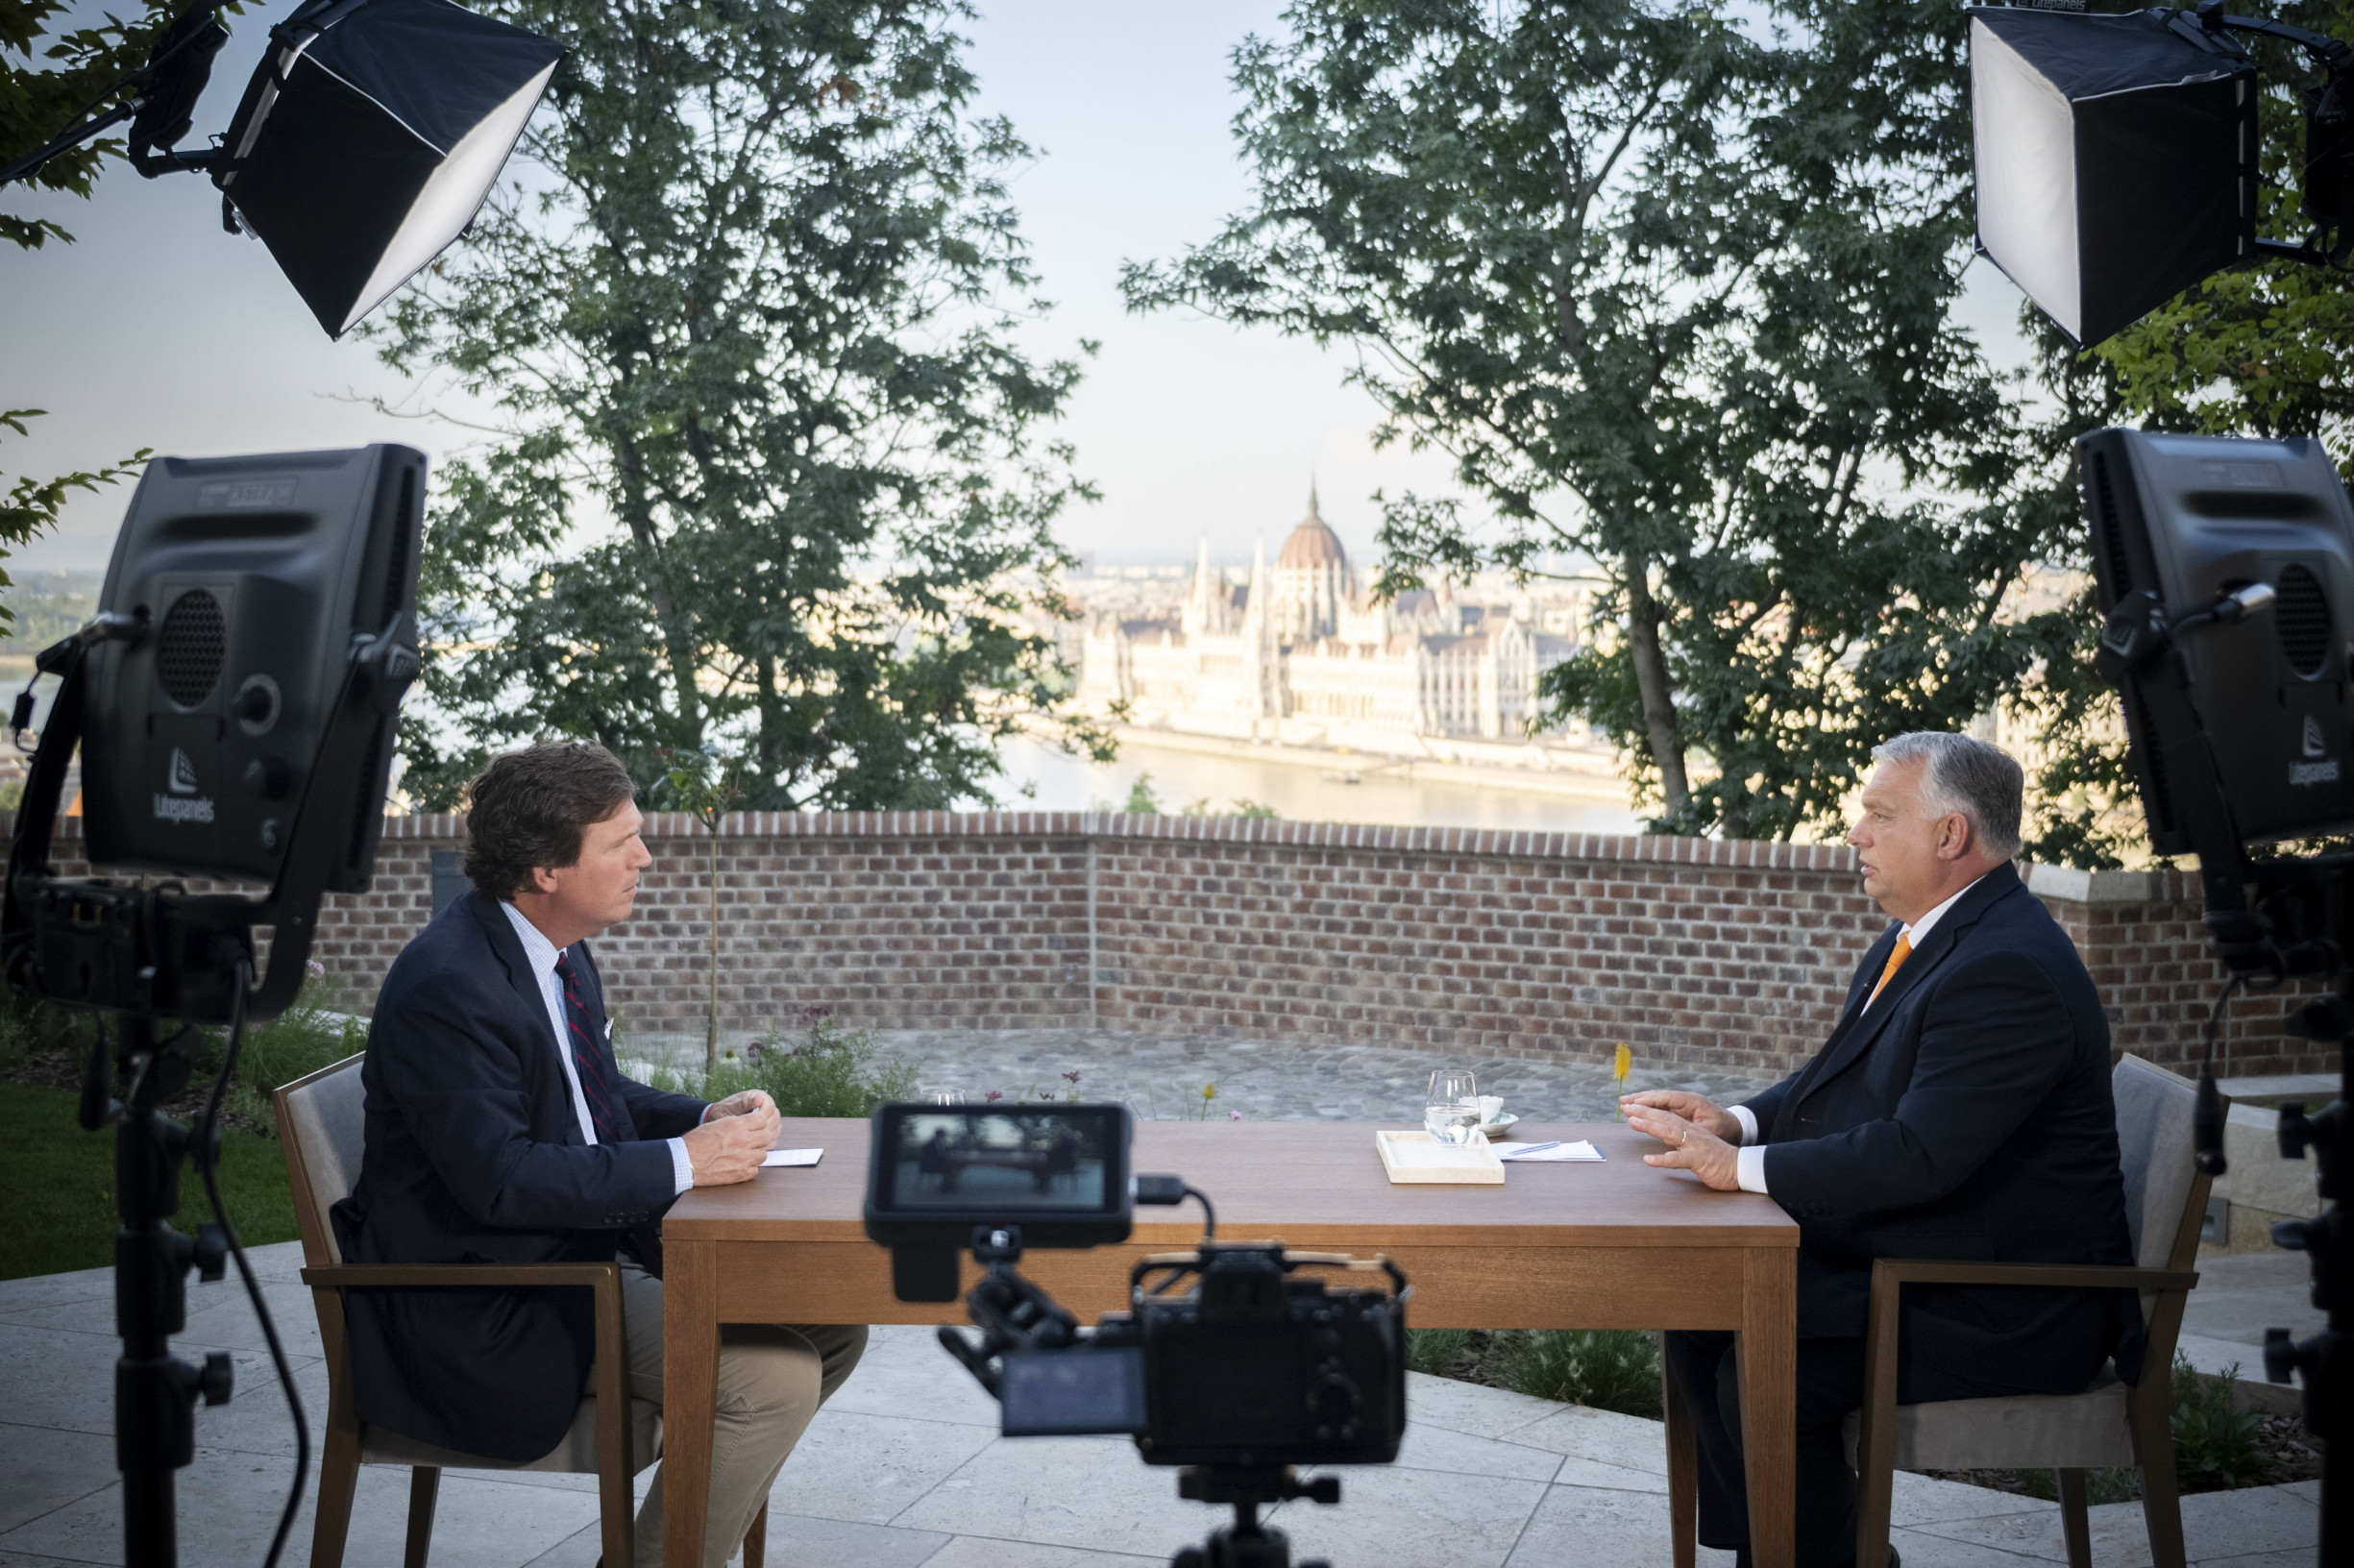 Watch: Why Orbán Claims “Trump Can Save the Western World” in New Carlson Interview